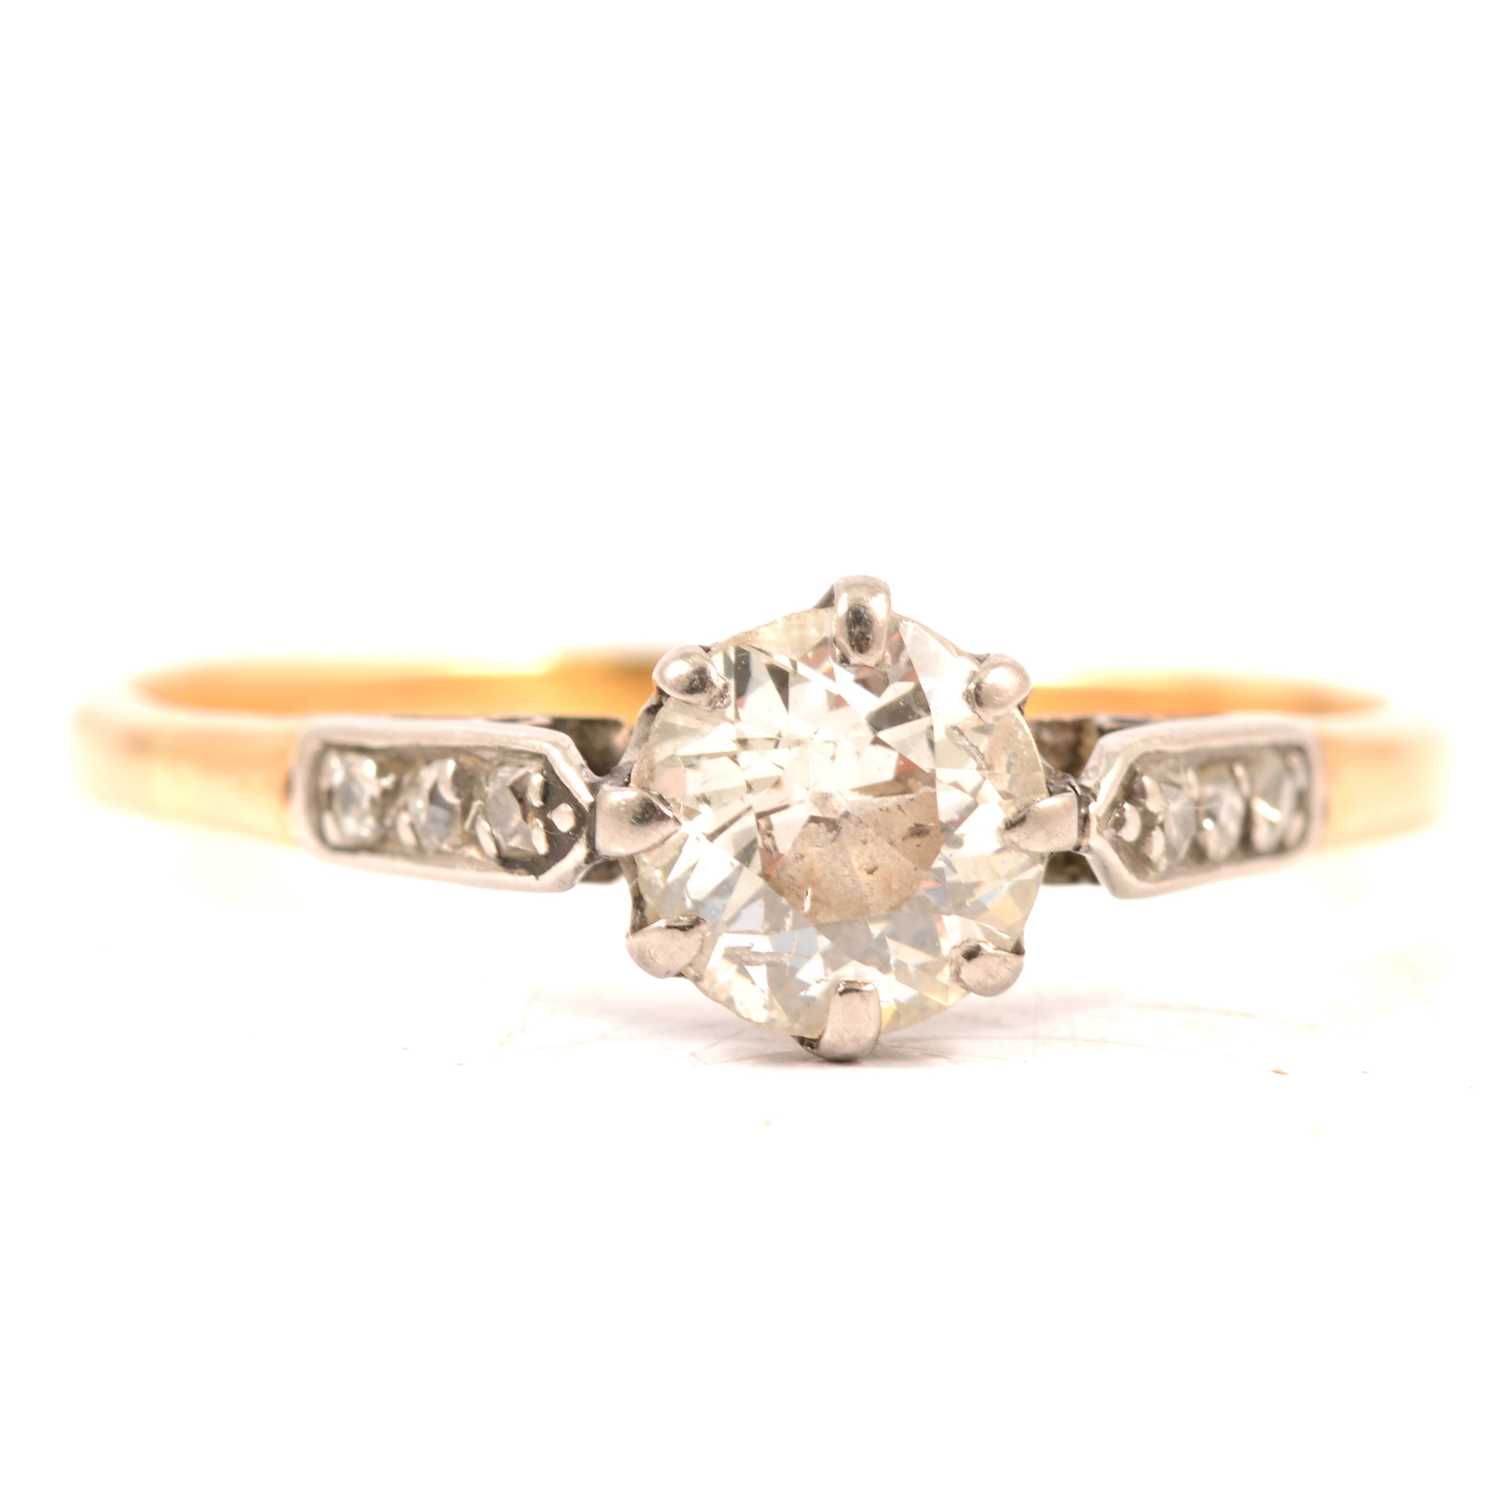 Lot 4 - A diamond solitaire ring.